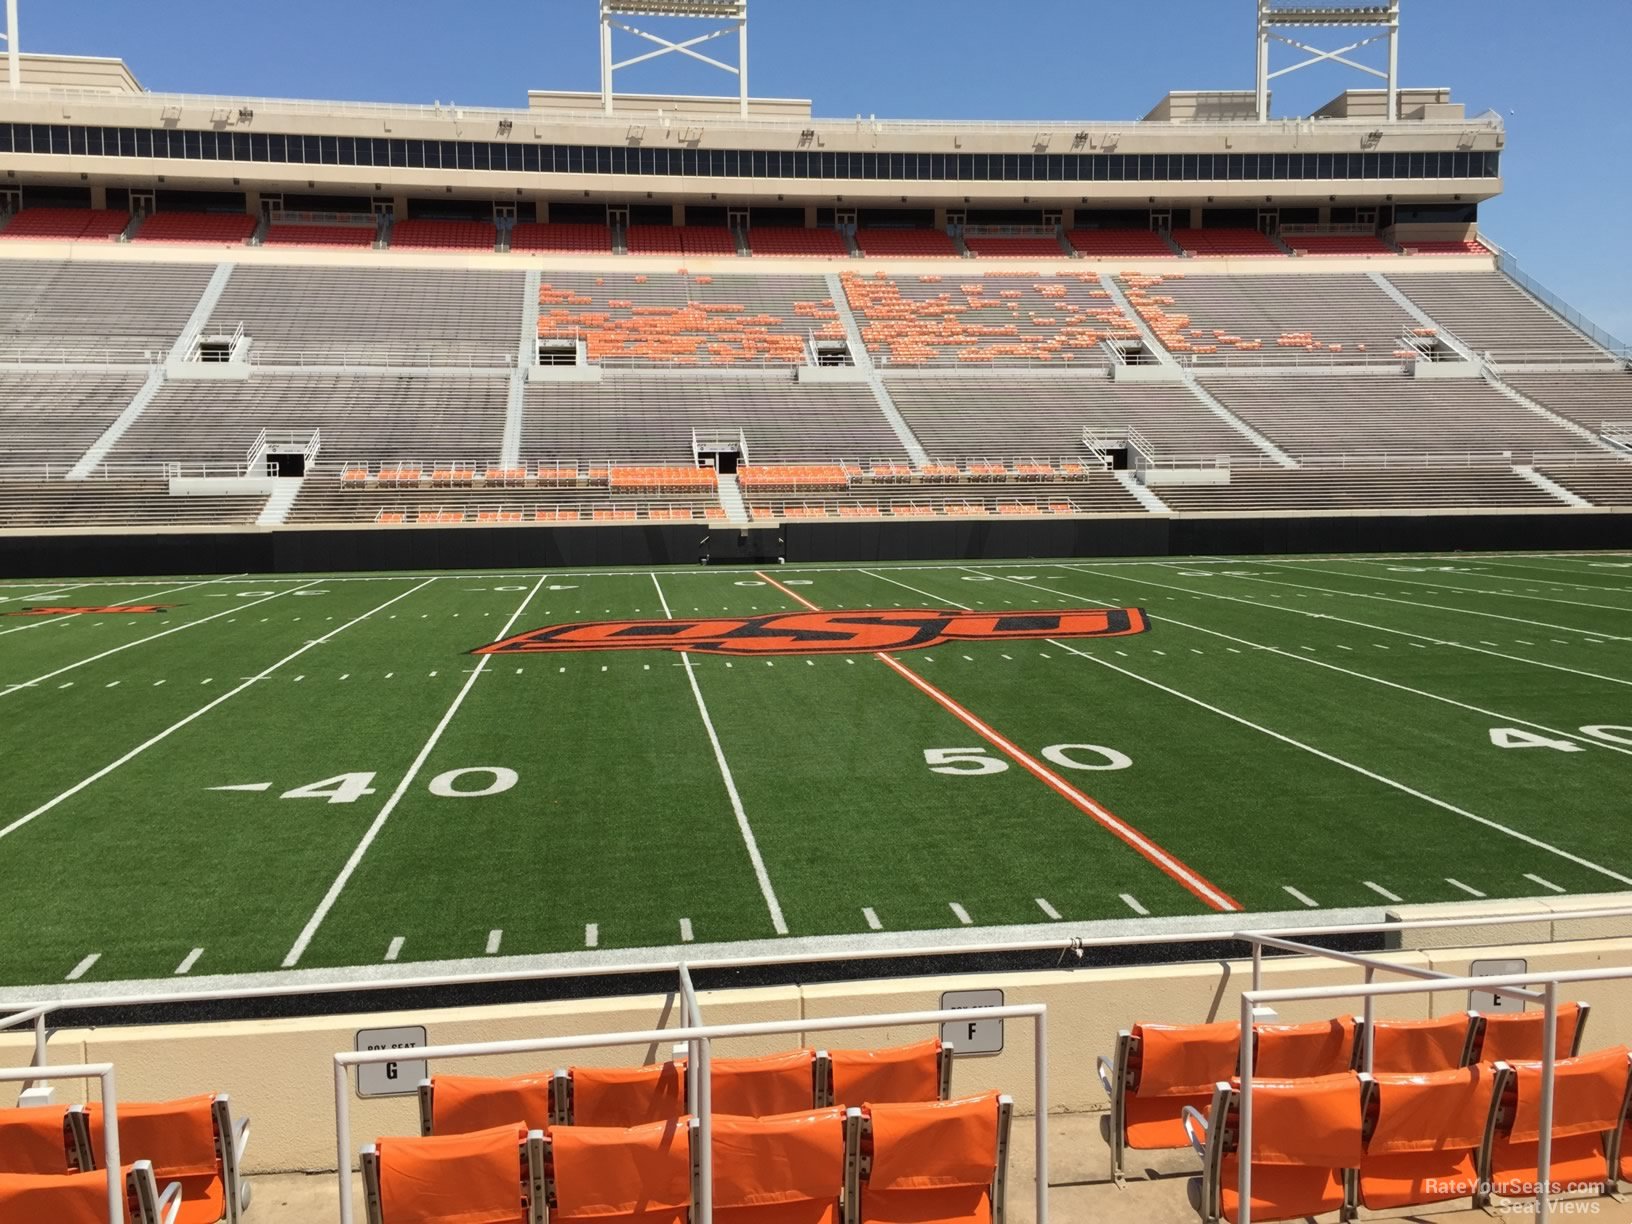 section 105, row 10 seat view  - boone pickens stadium